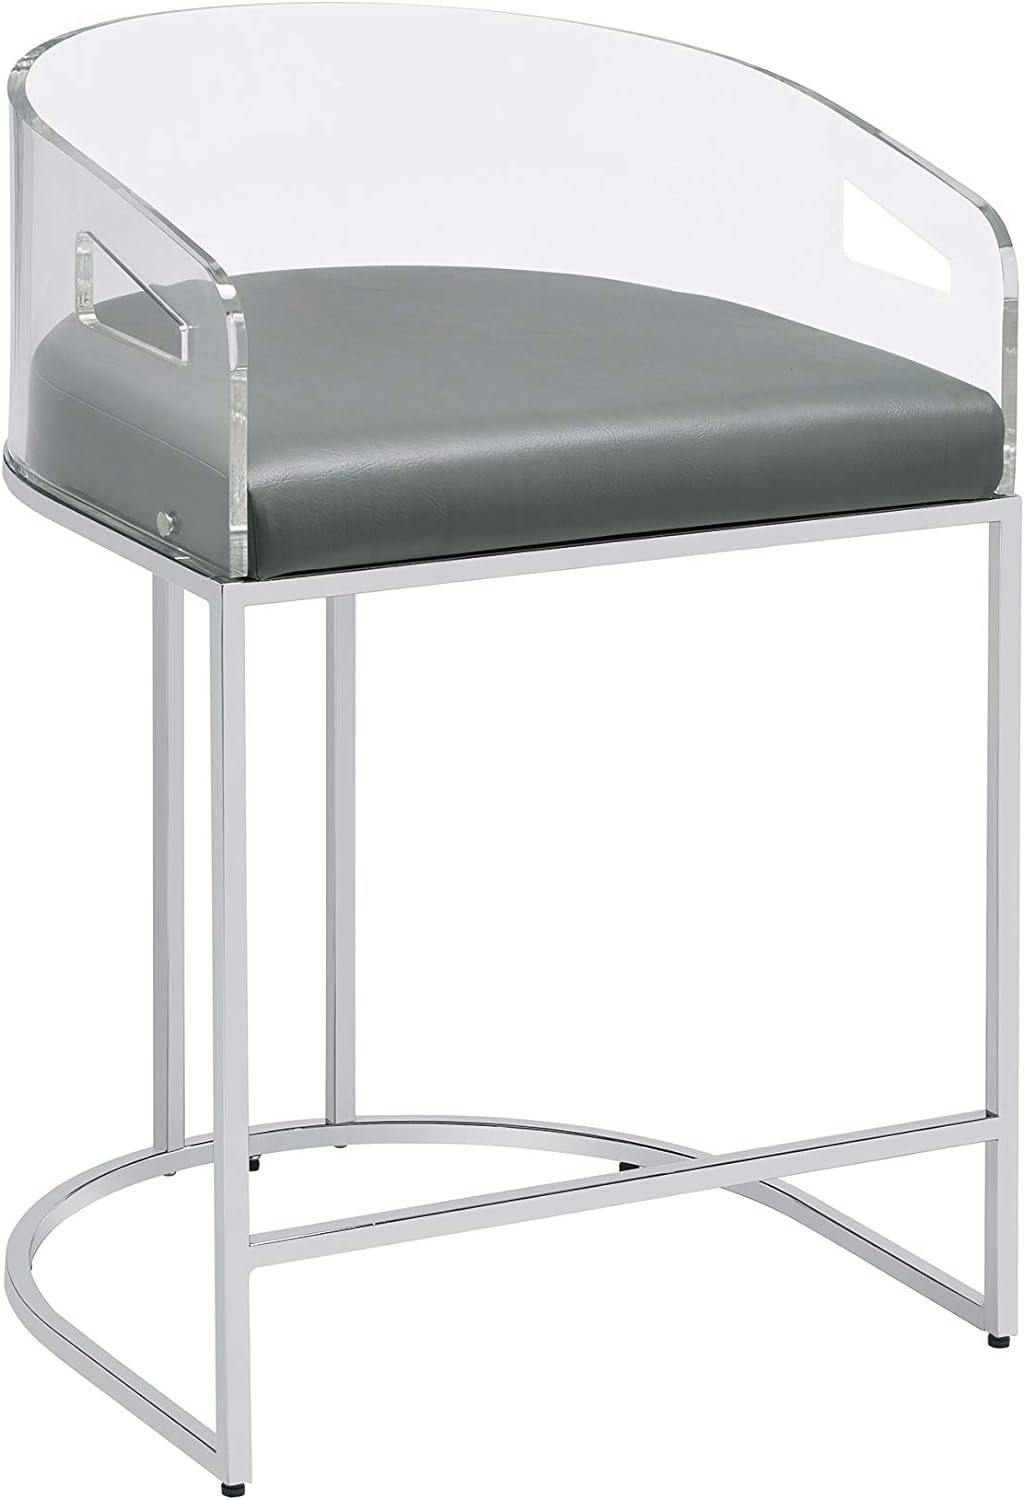 Transitional Thermosolis Counter Stools with Acrylic Back, Grey and Chrome